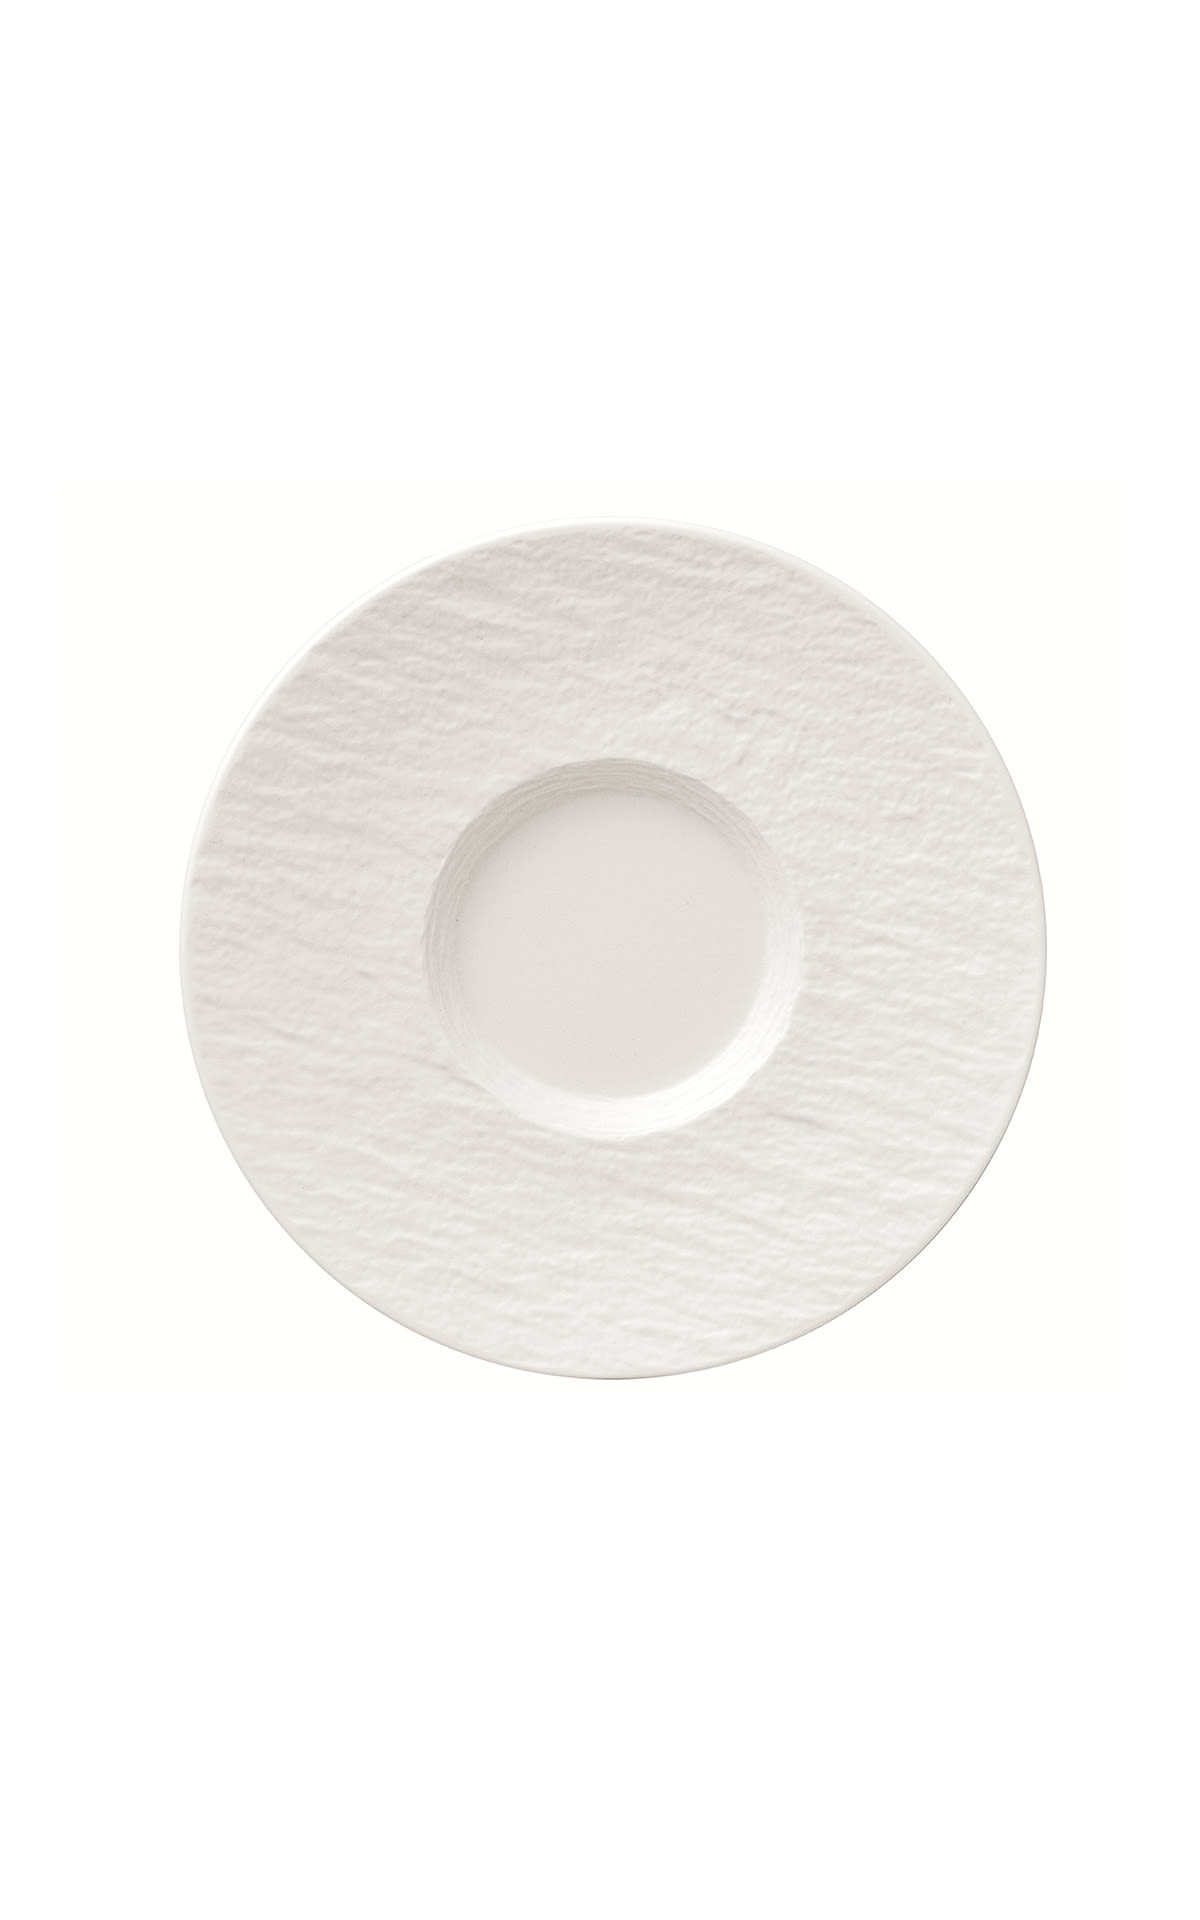 White Plate Manufacture Rock Villeroy & Boch